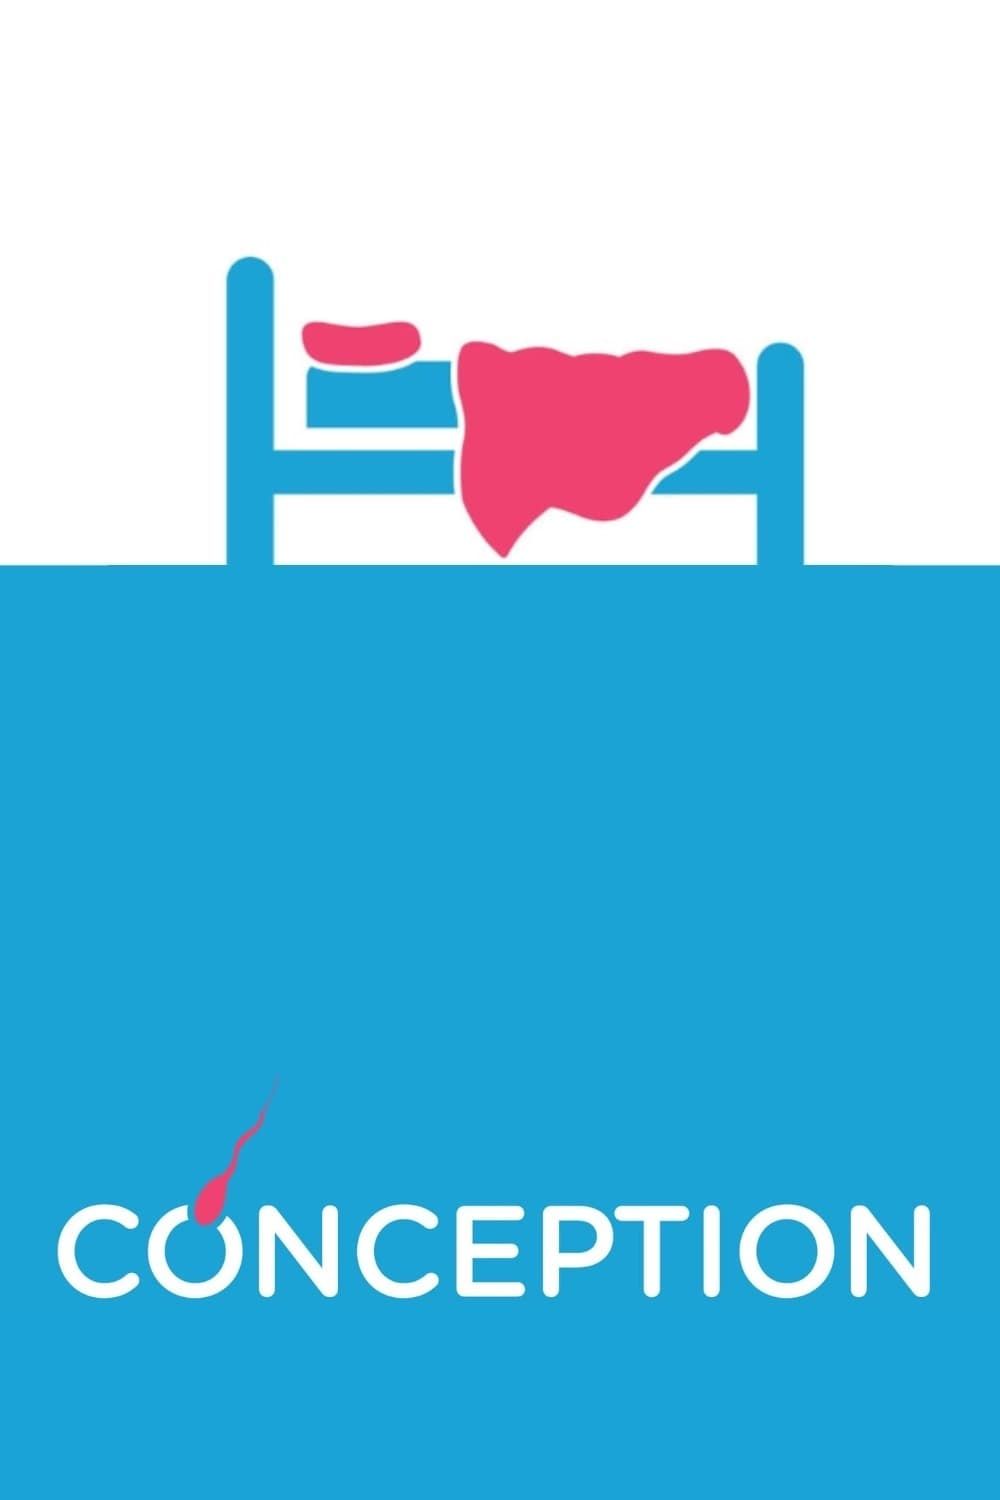 Watch Conception season 1 episode 4 streaming online